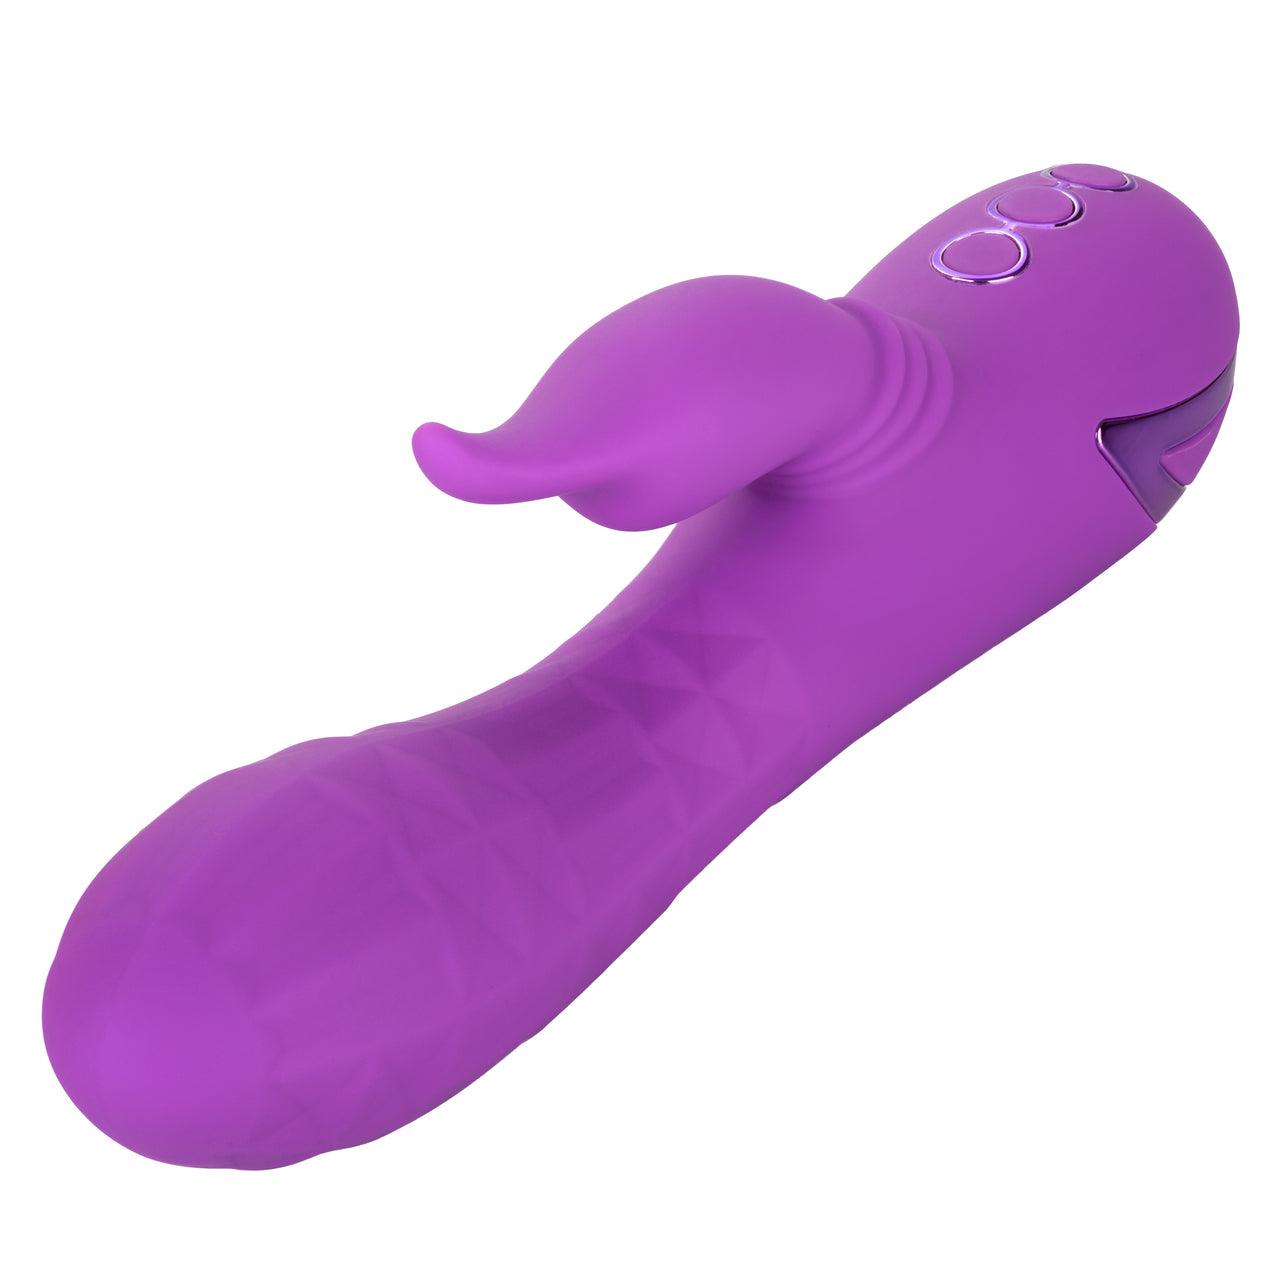 Calexotics California Dreaming West Coast Wave Rider - Buy At Luxury Toy X - Free 3-Day Shipping